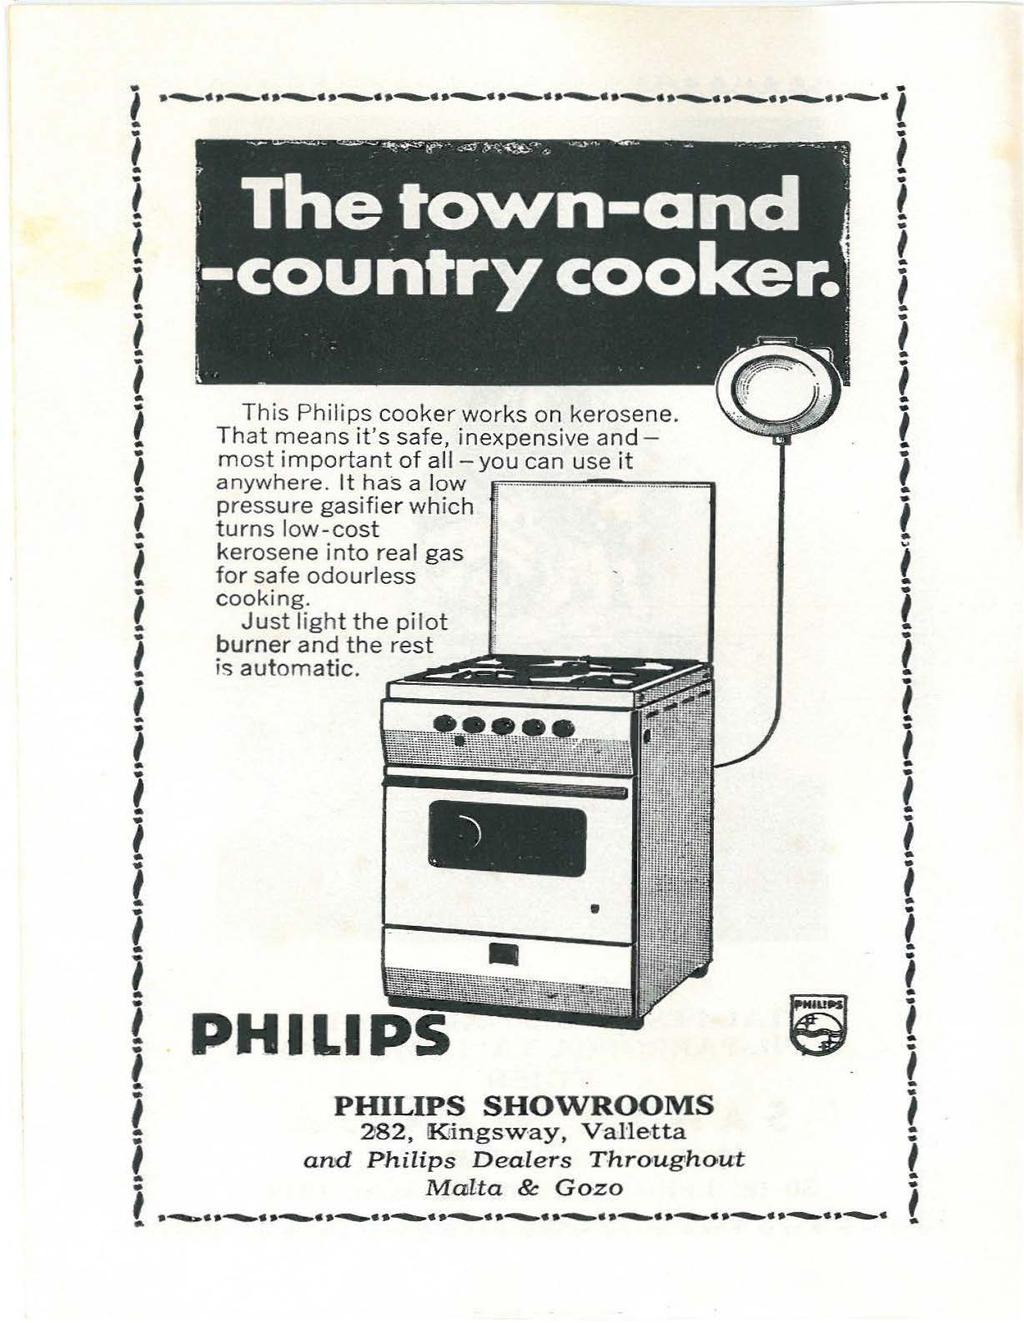 ~ ~ -~ ~ ~ ~ ~ ~ i. i i --. l Th is Philips cooker works on kerosene.,. l That means it's safe, inexpensive and - m ost im portant of all -you ca n use it i anywhere.